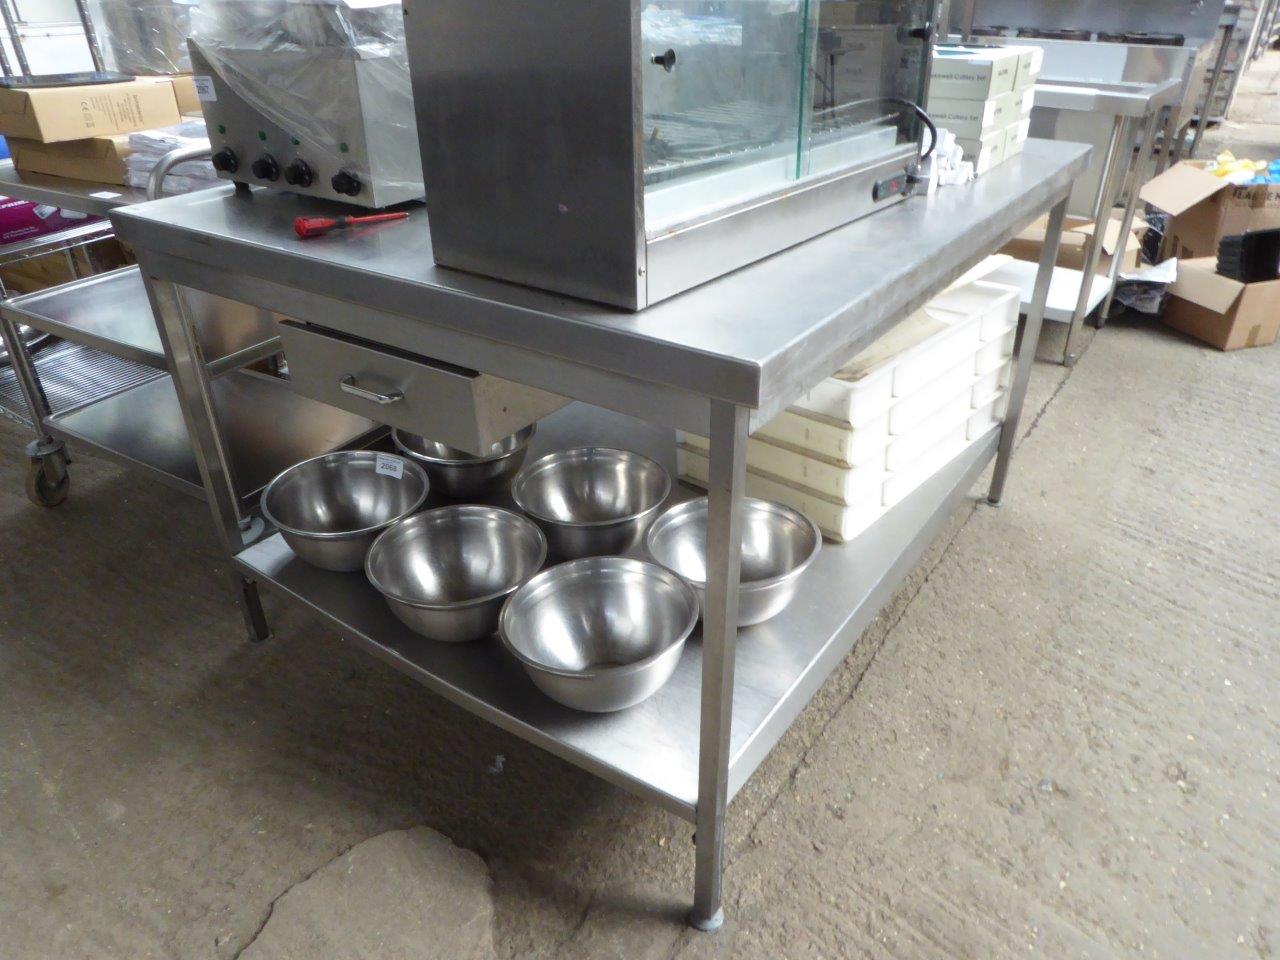 Stainless-steel centre table with 2 drawers.